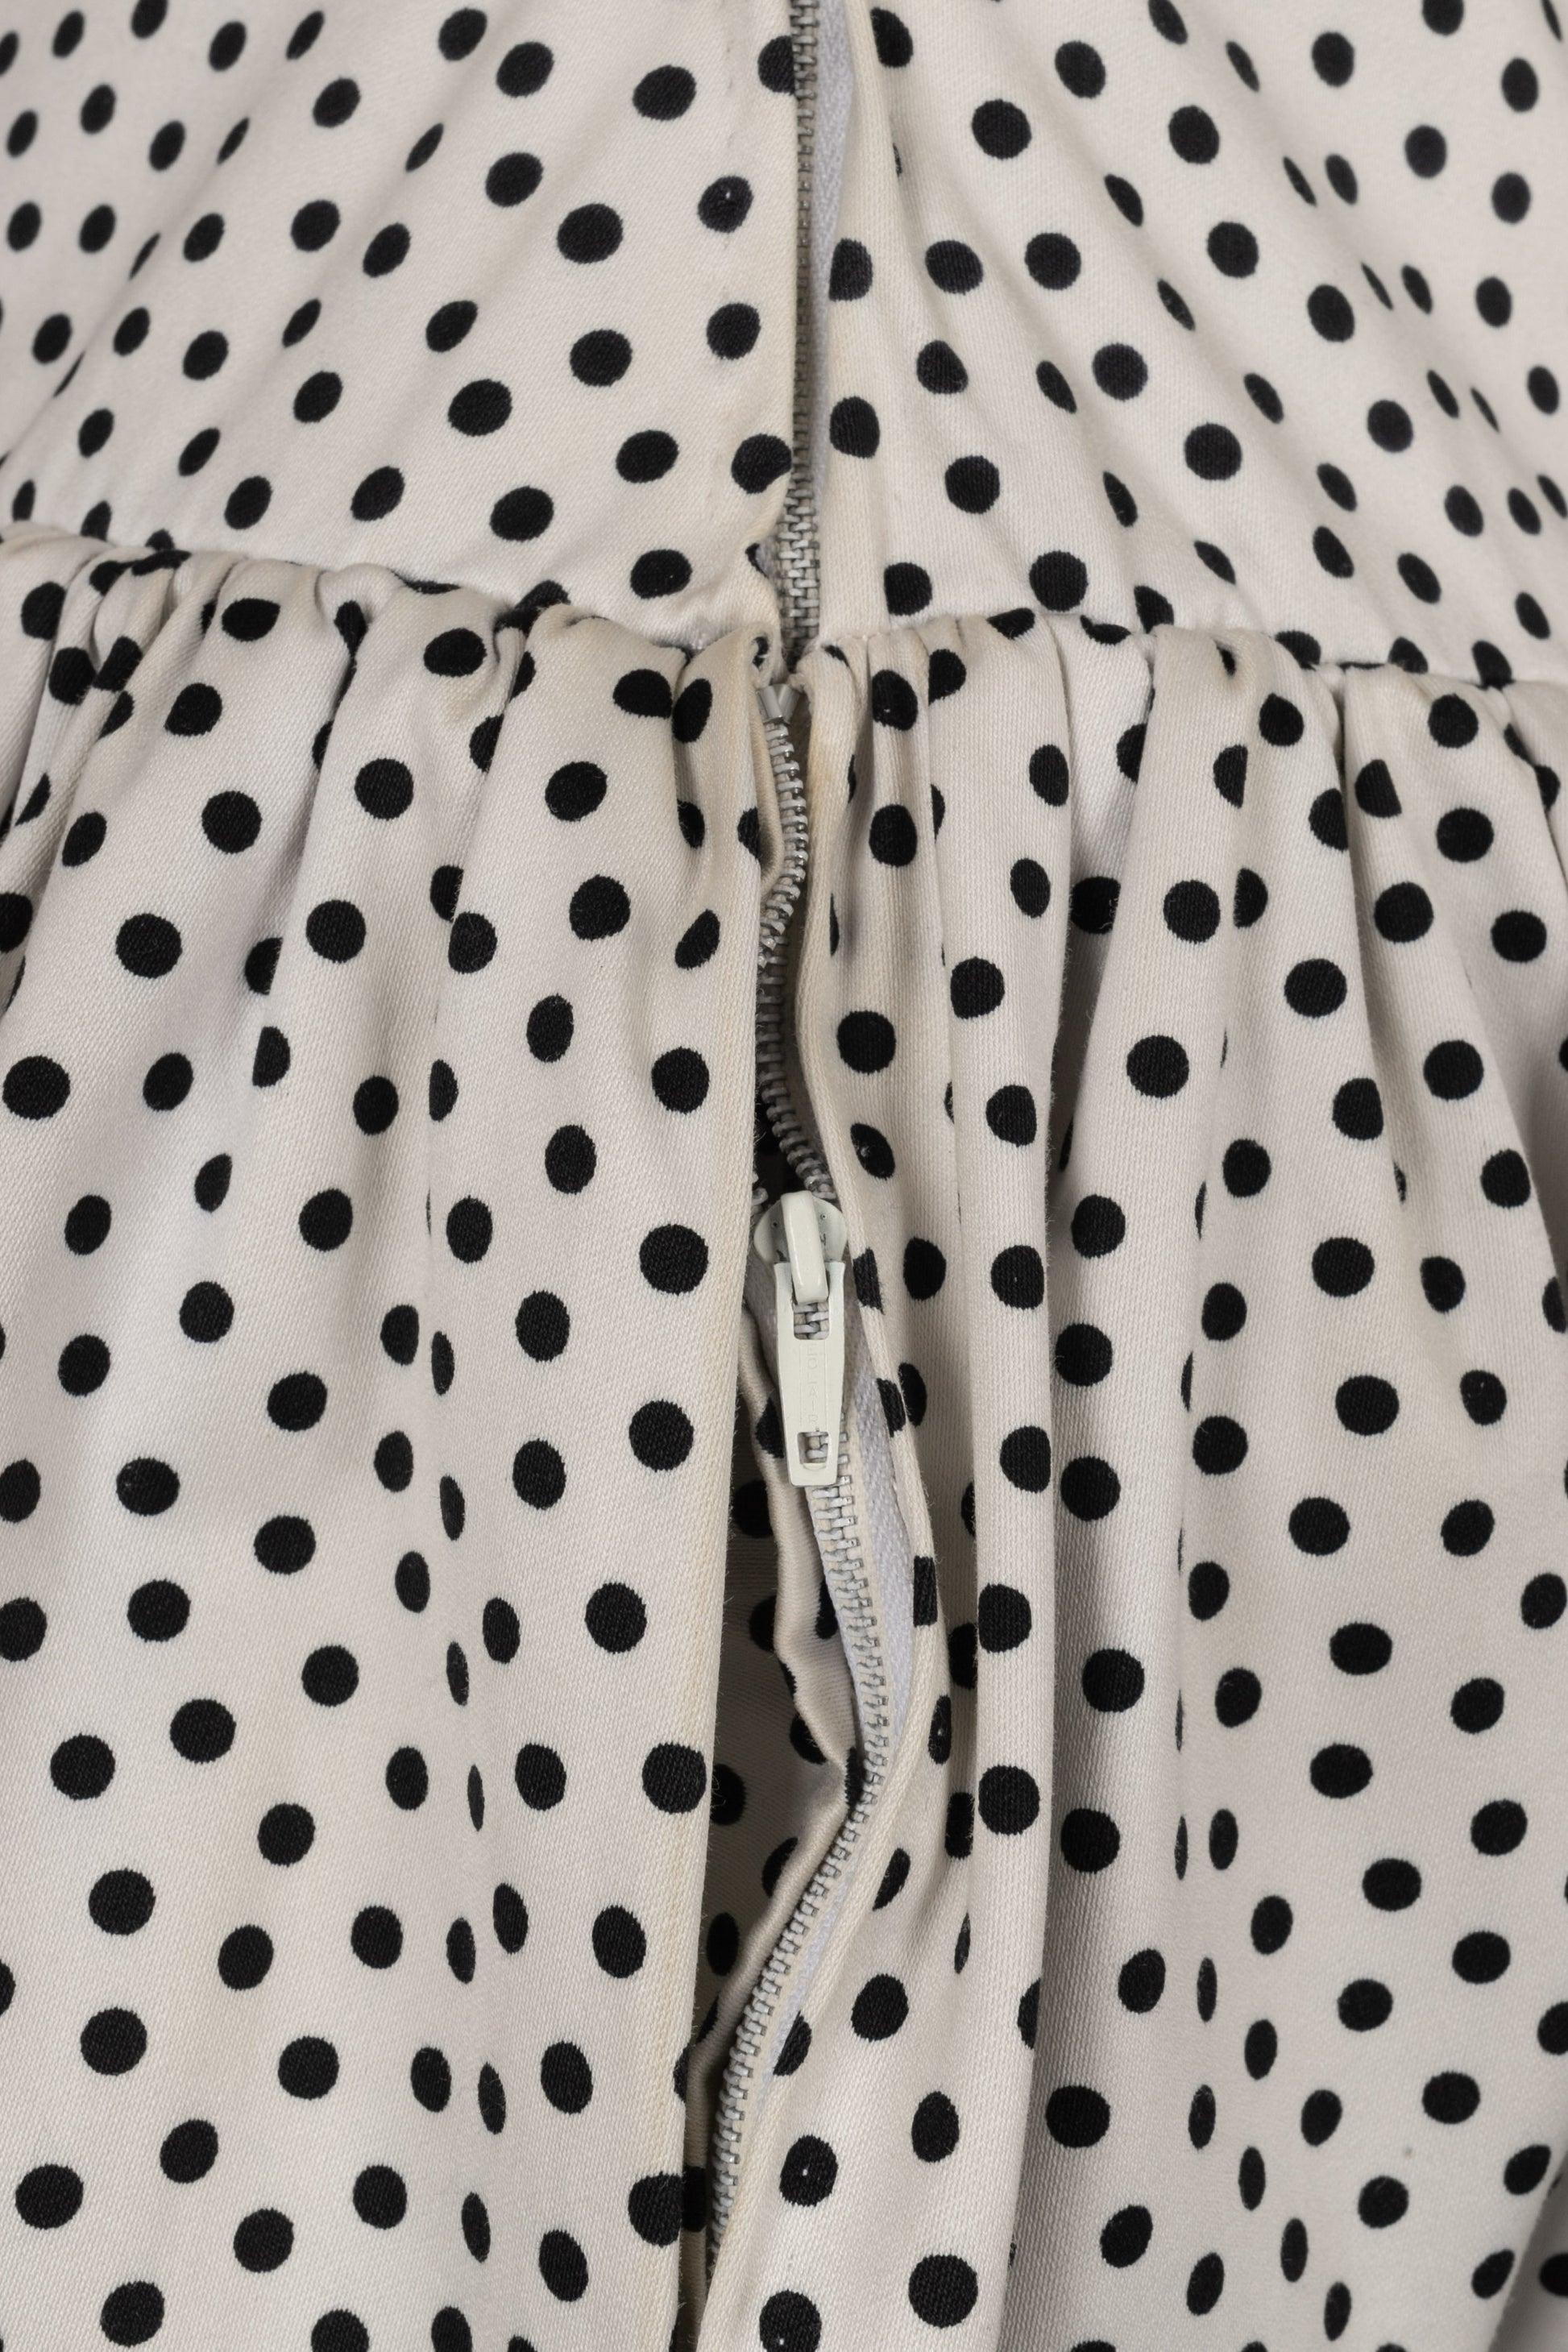 Lanvin Black and White Dotted Cotton Bustier Dress For Sale 2